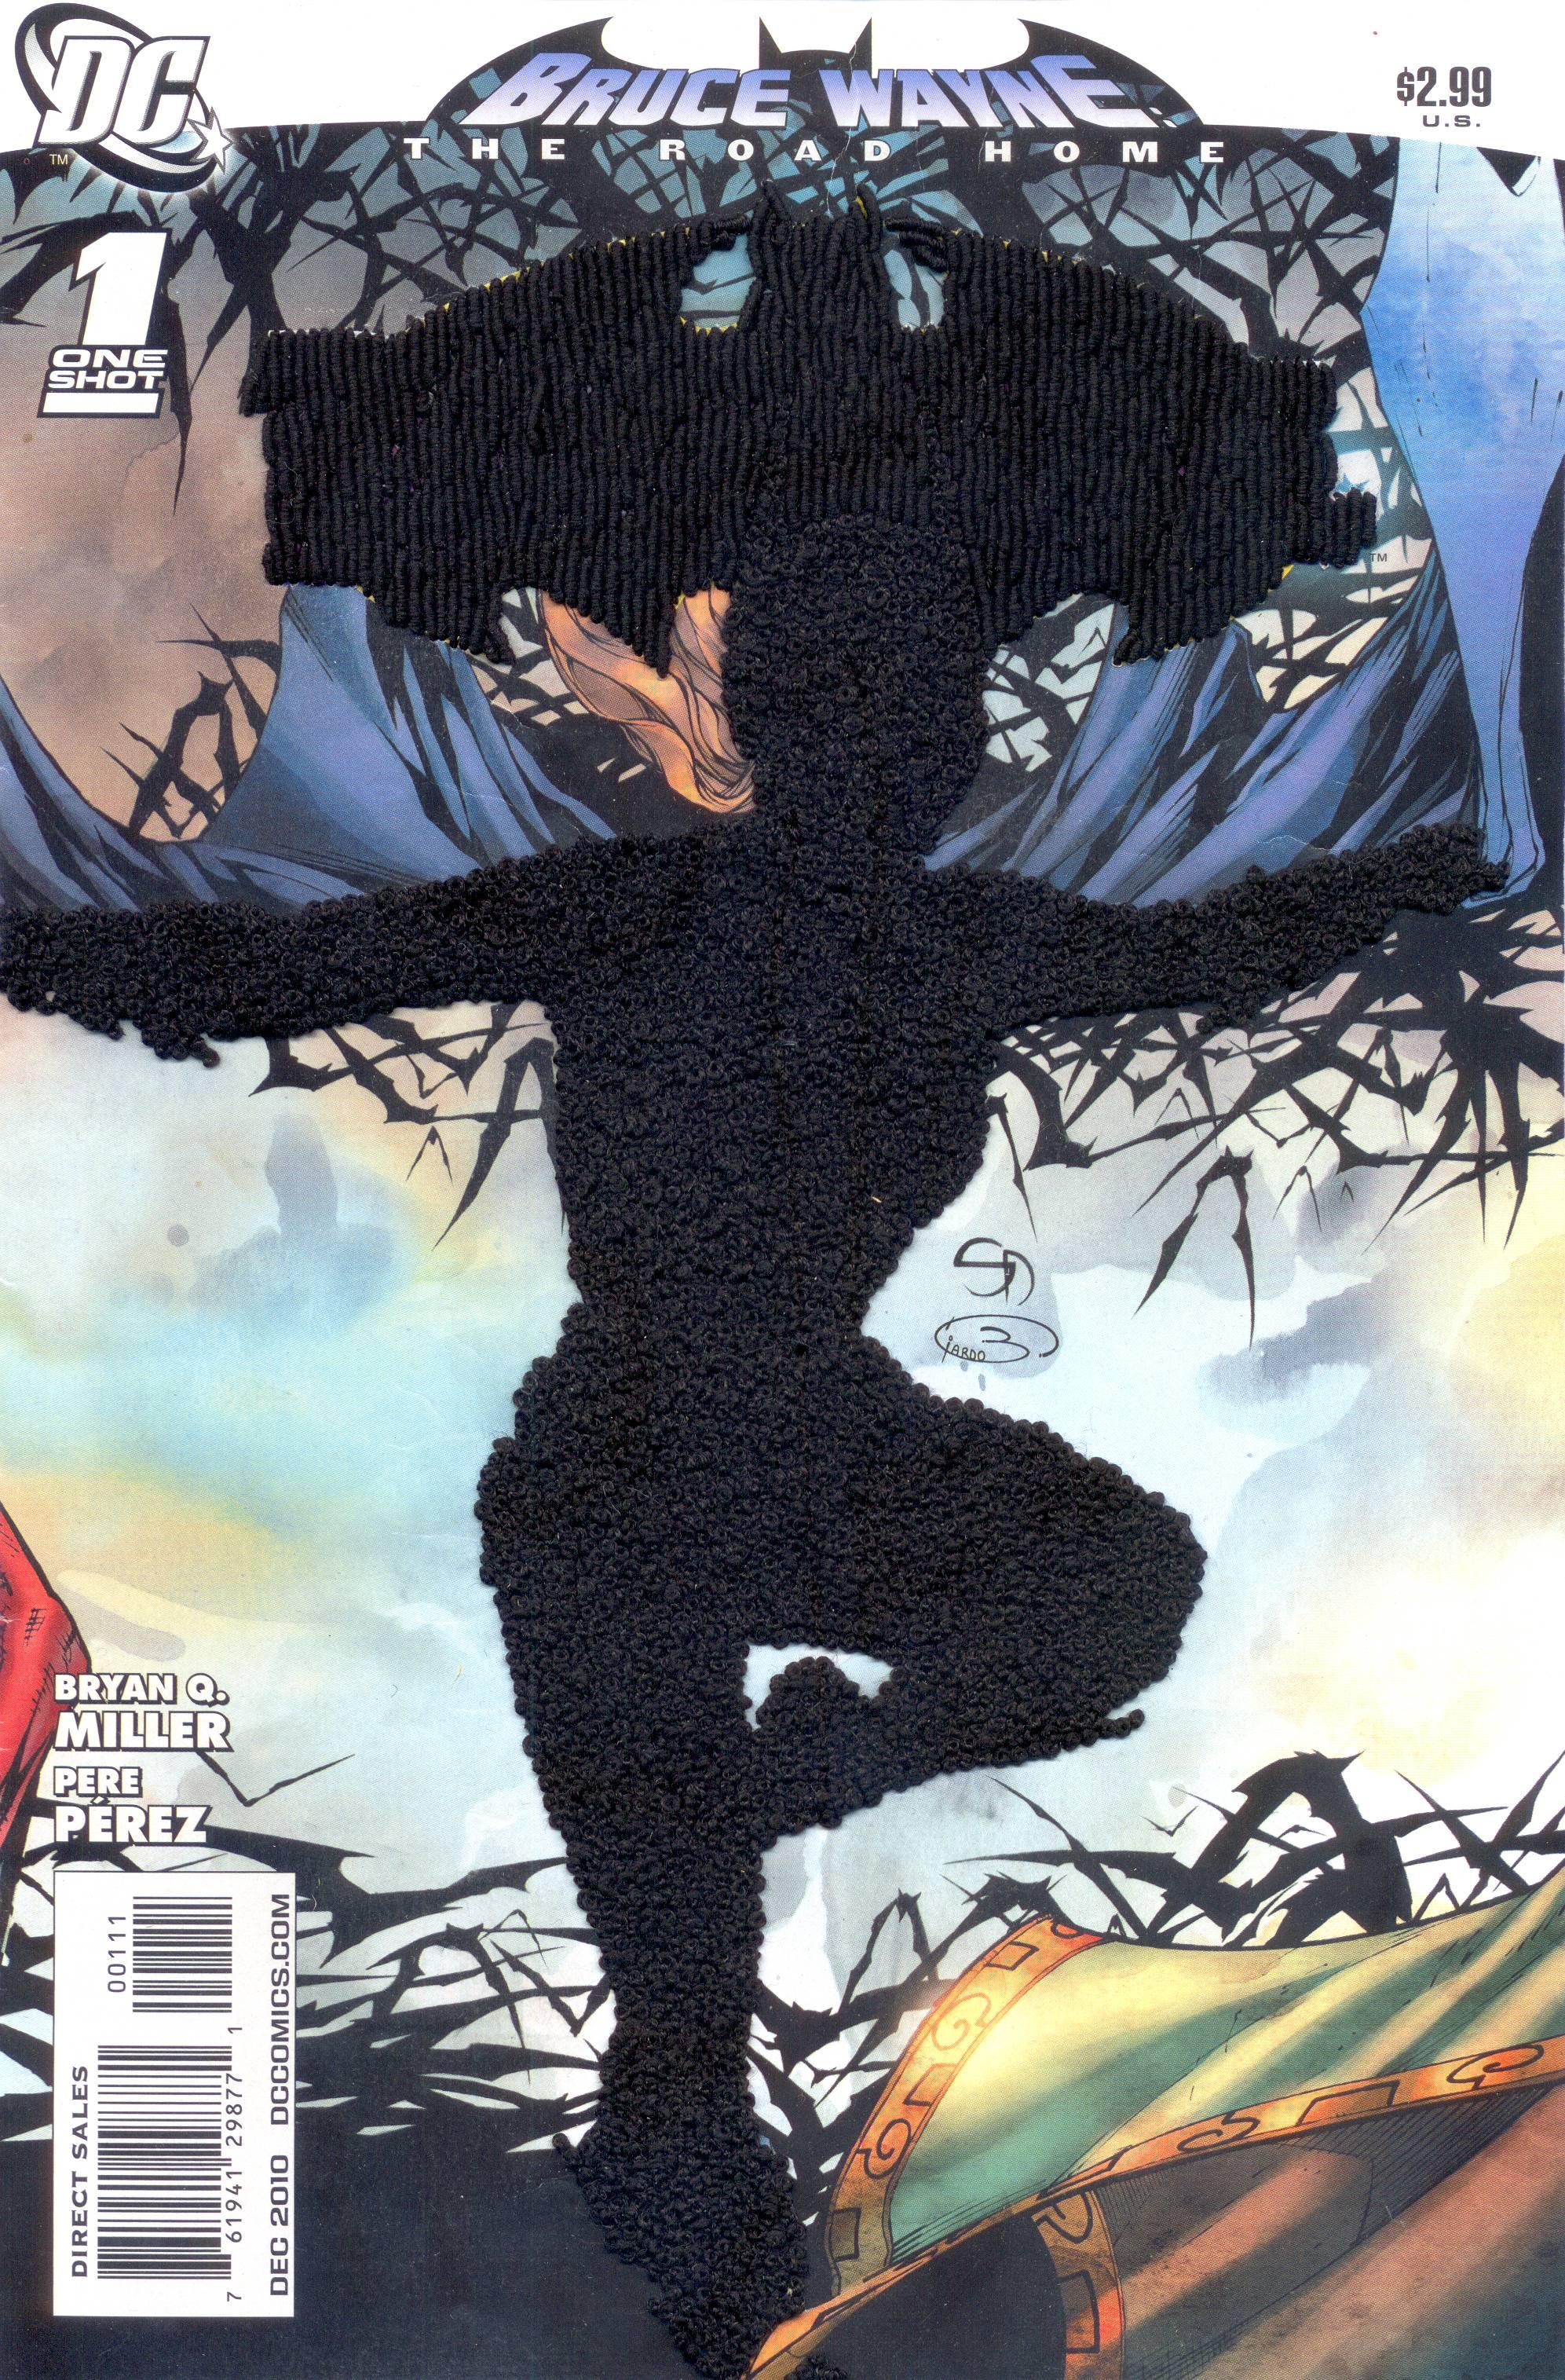 Mark Newport Abstract Sculpture - "Batgirl: A Road Home", Embroidery on Comic Book Cover, Framed